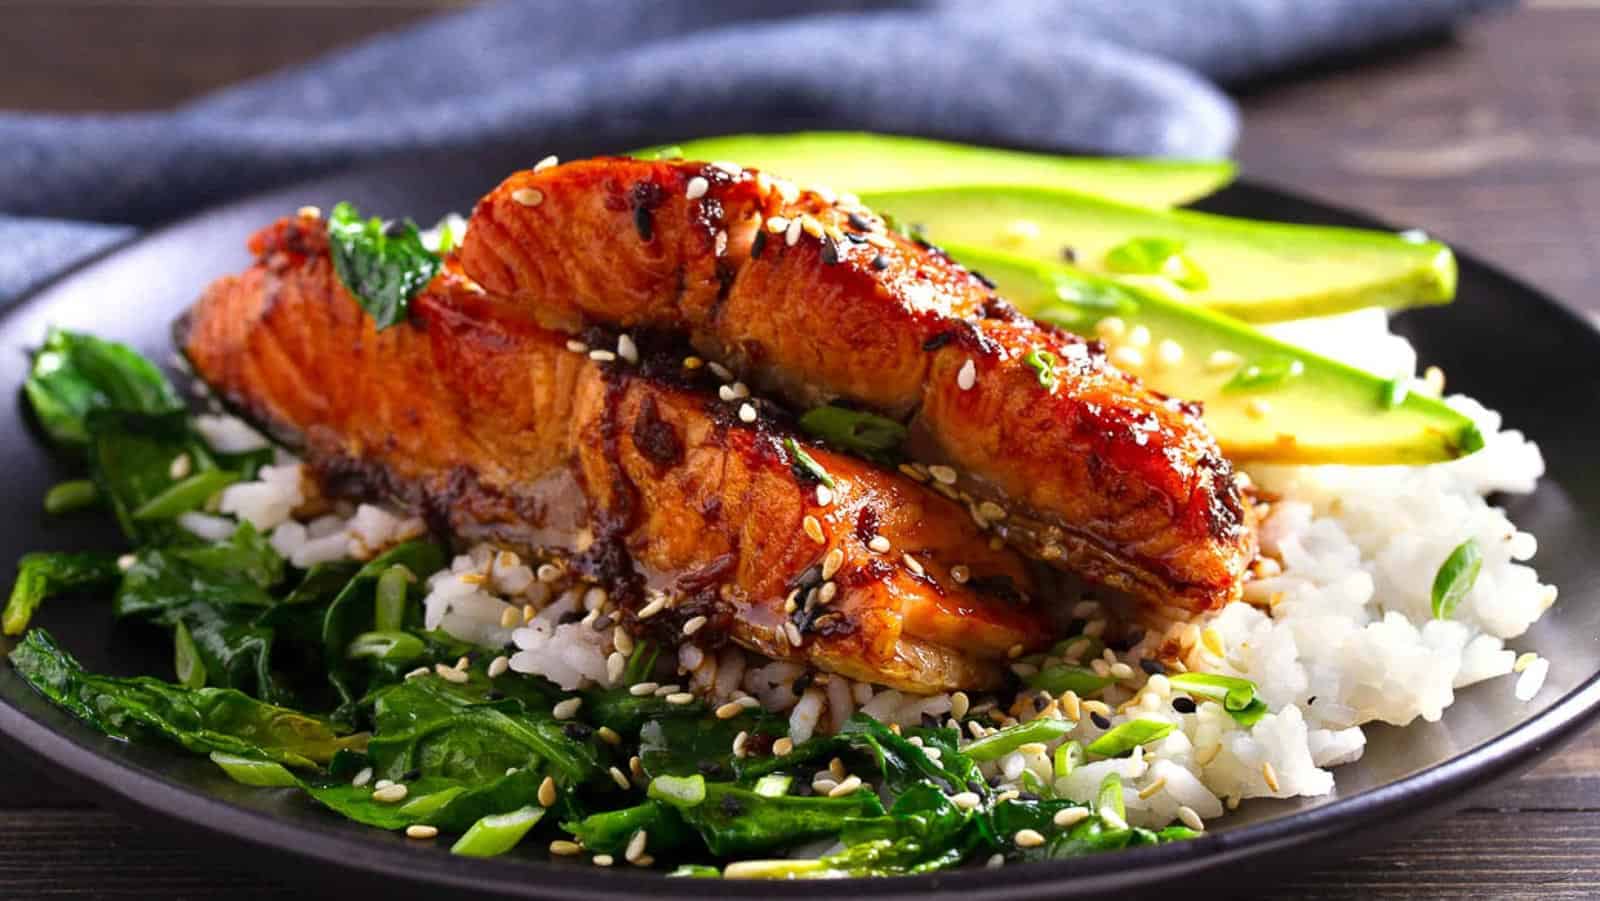 Miso glazed salmon on a plate with rice and spinach.